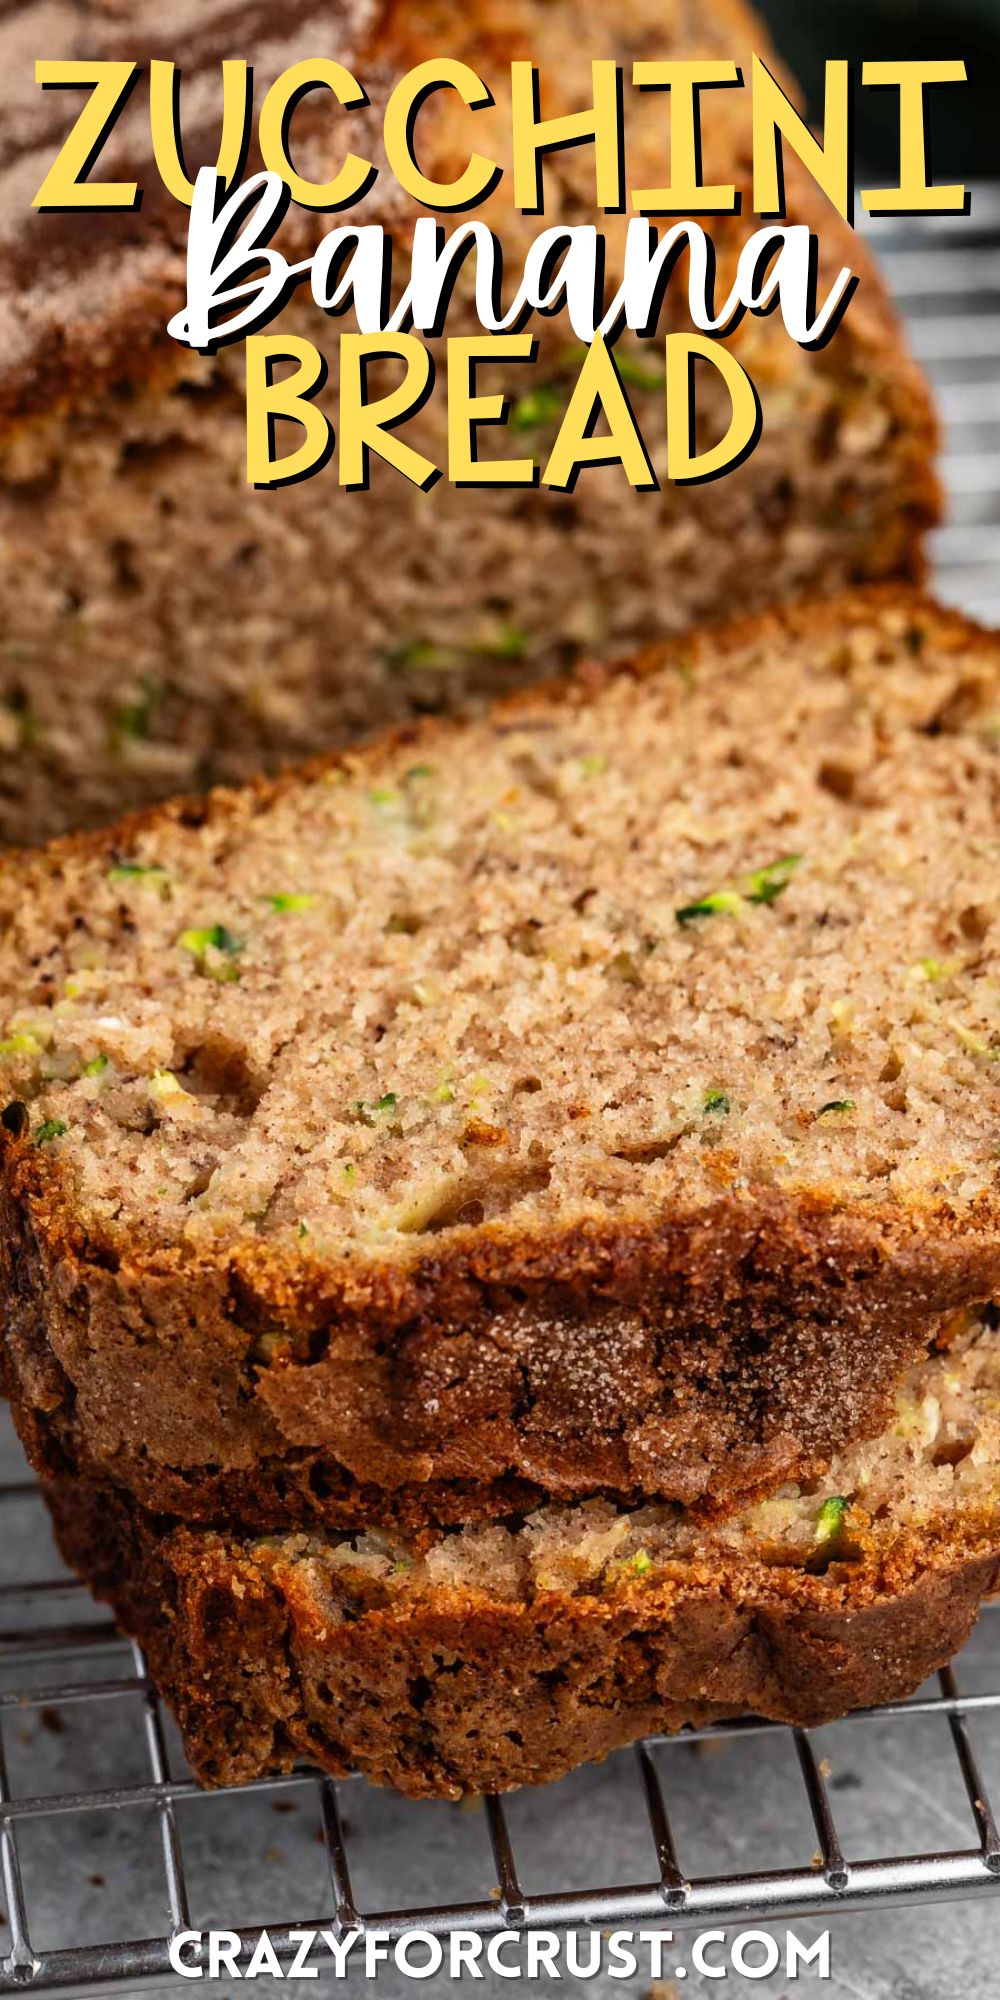 sliced banana bread with shredded zucchini baked inside with words on the image.